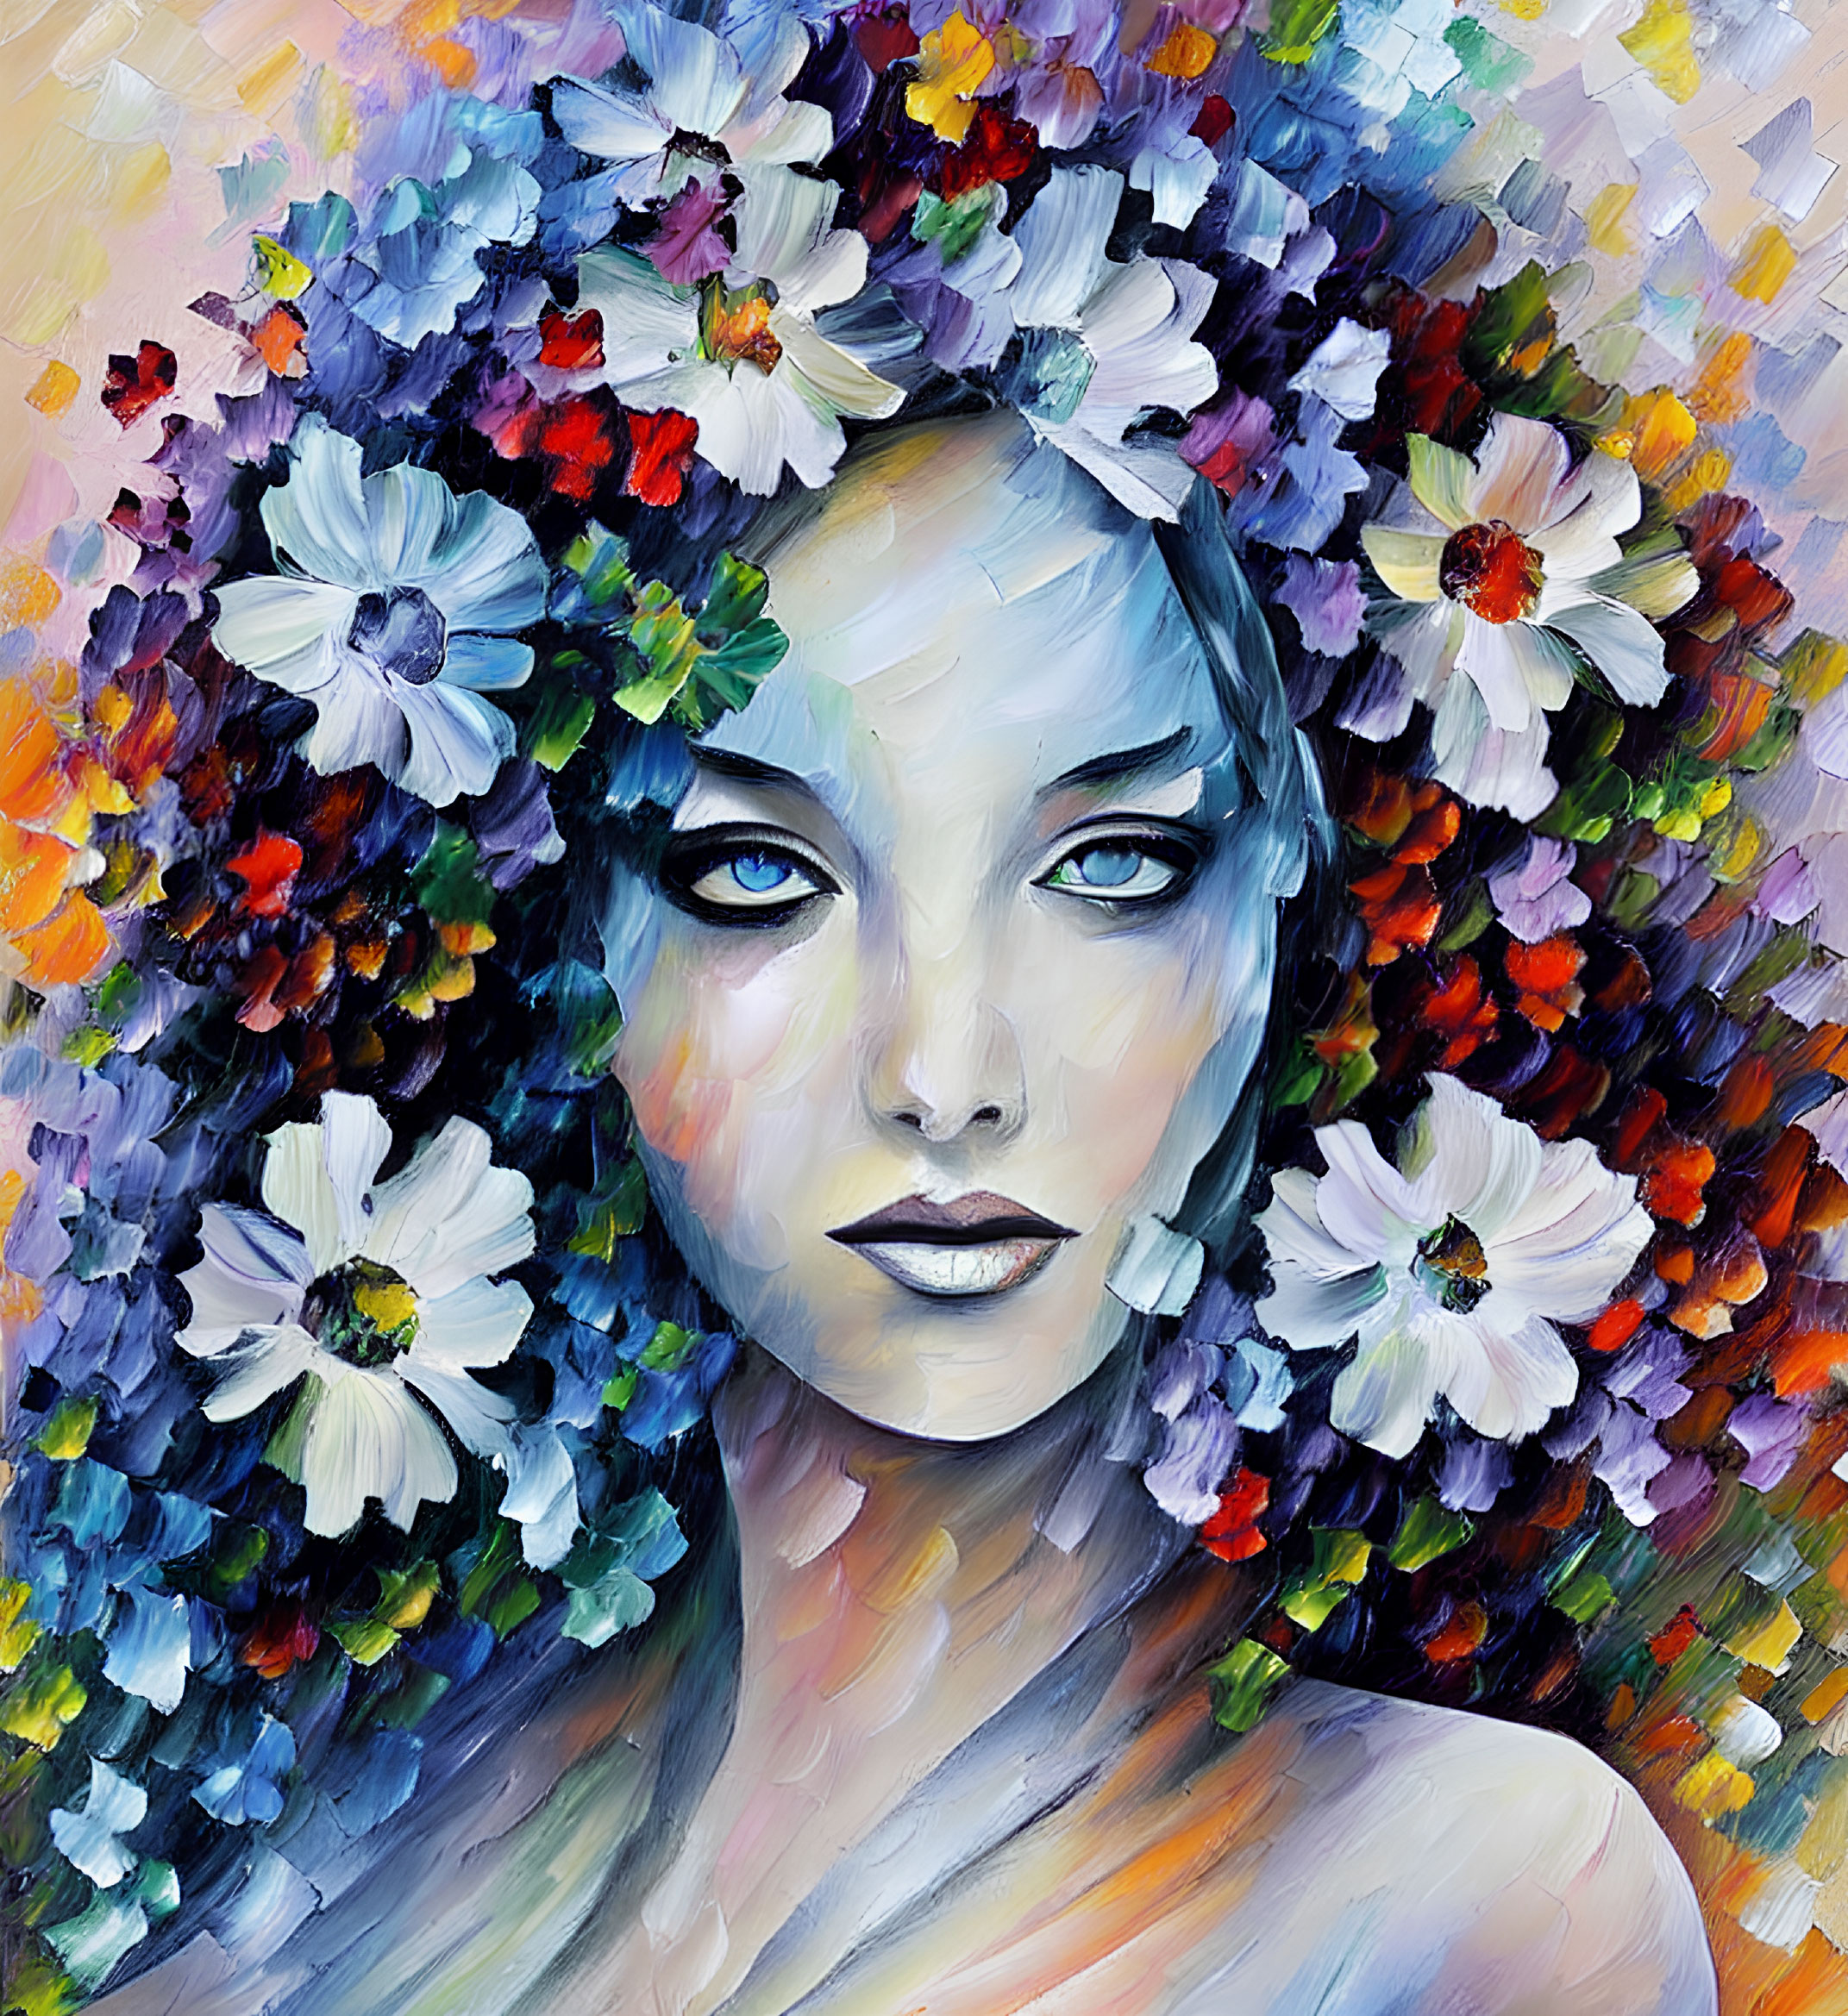 Vibrant painting of a woman with blue eyes and floral crown